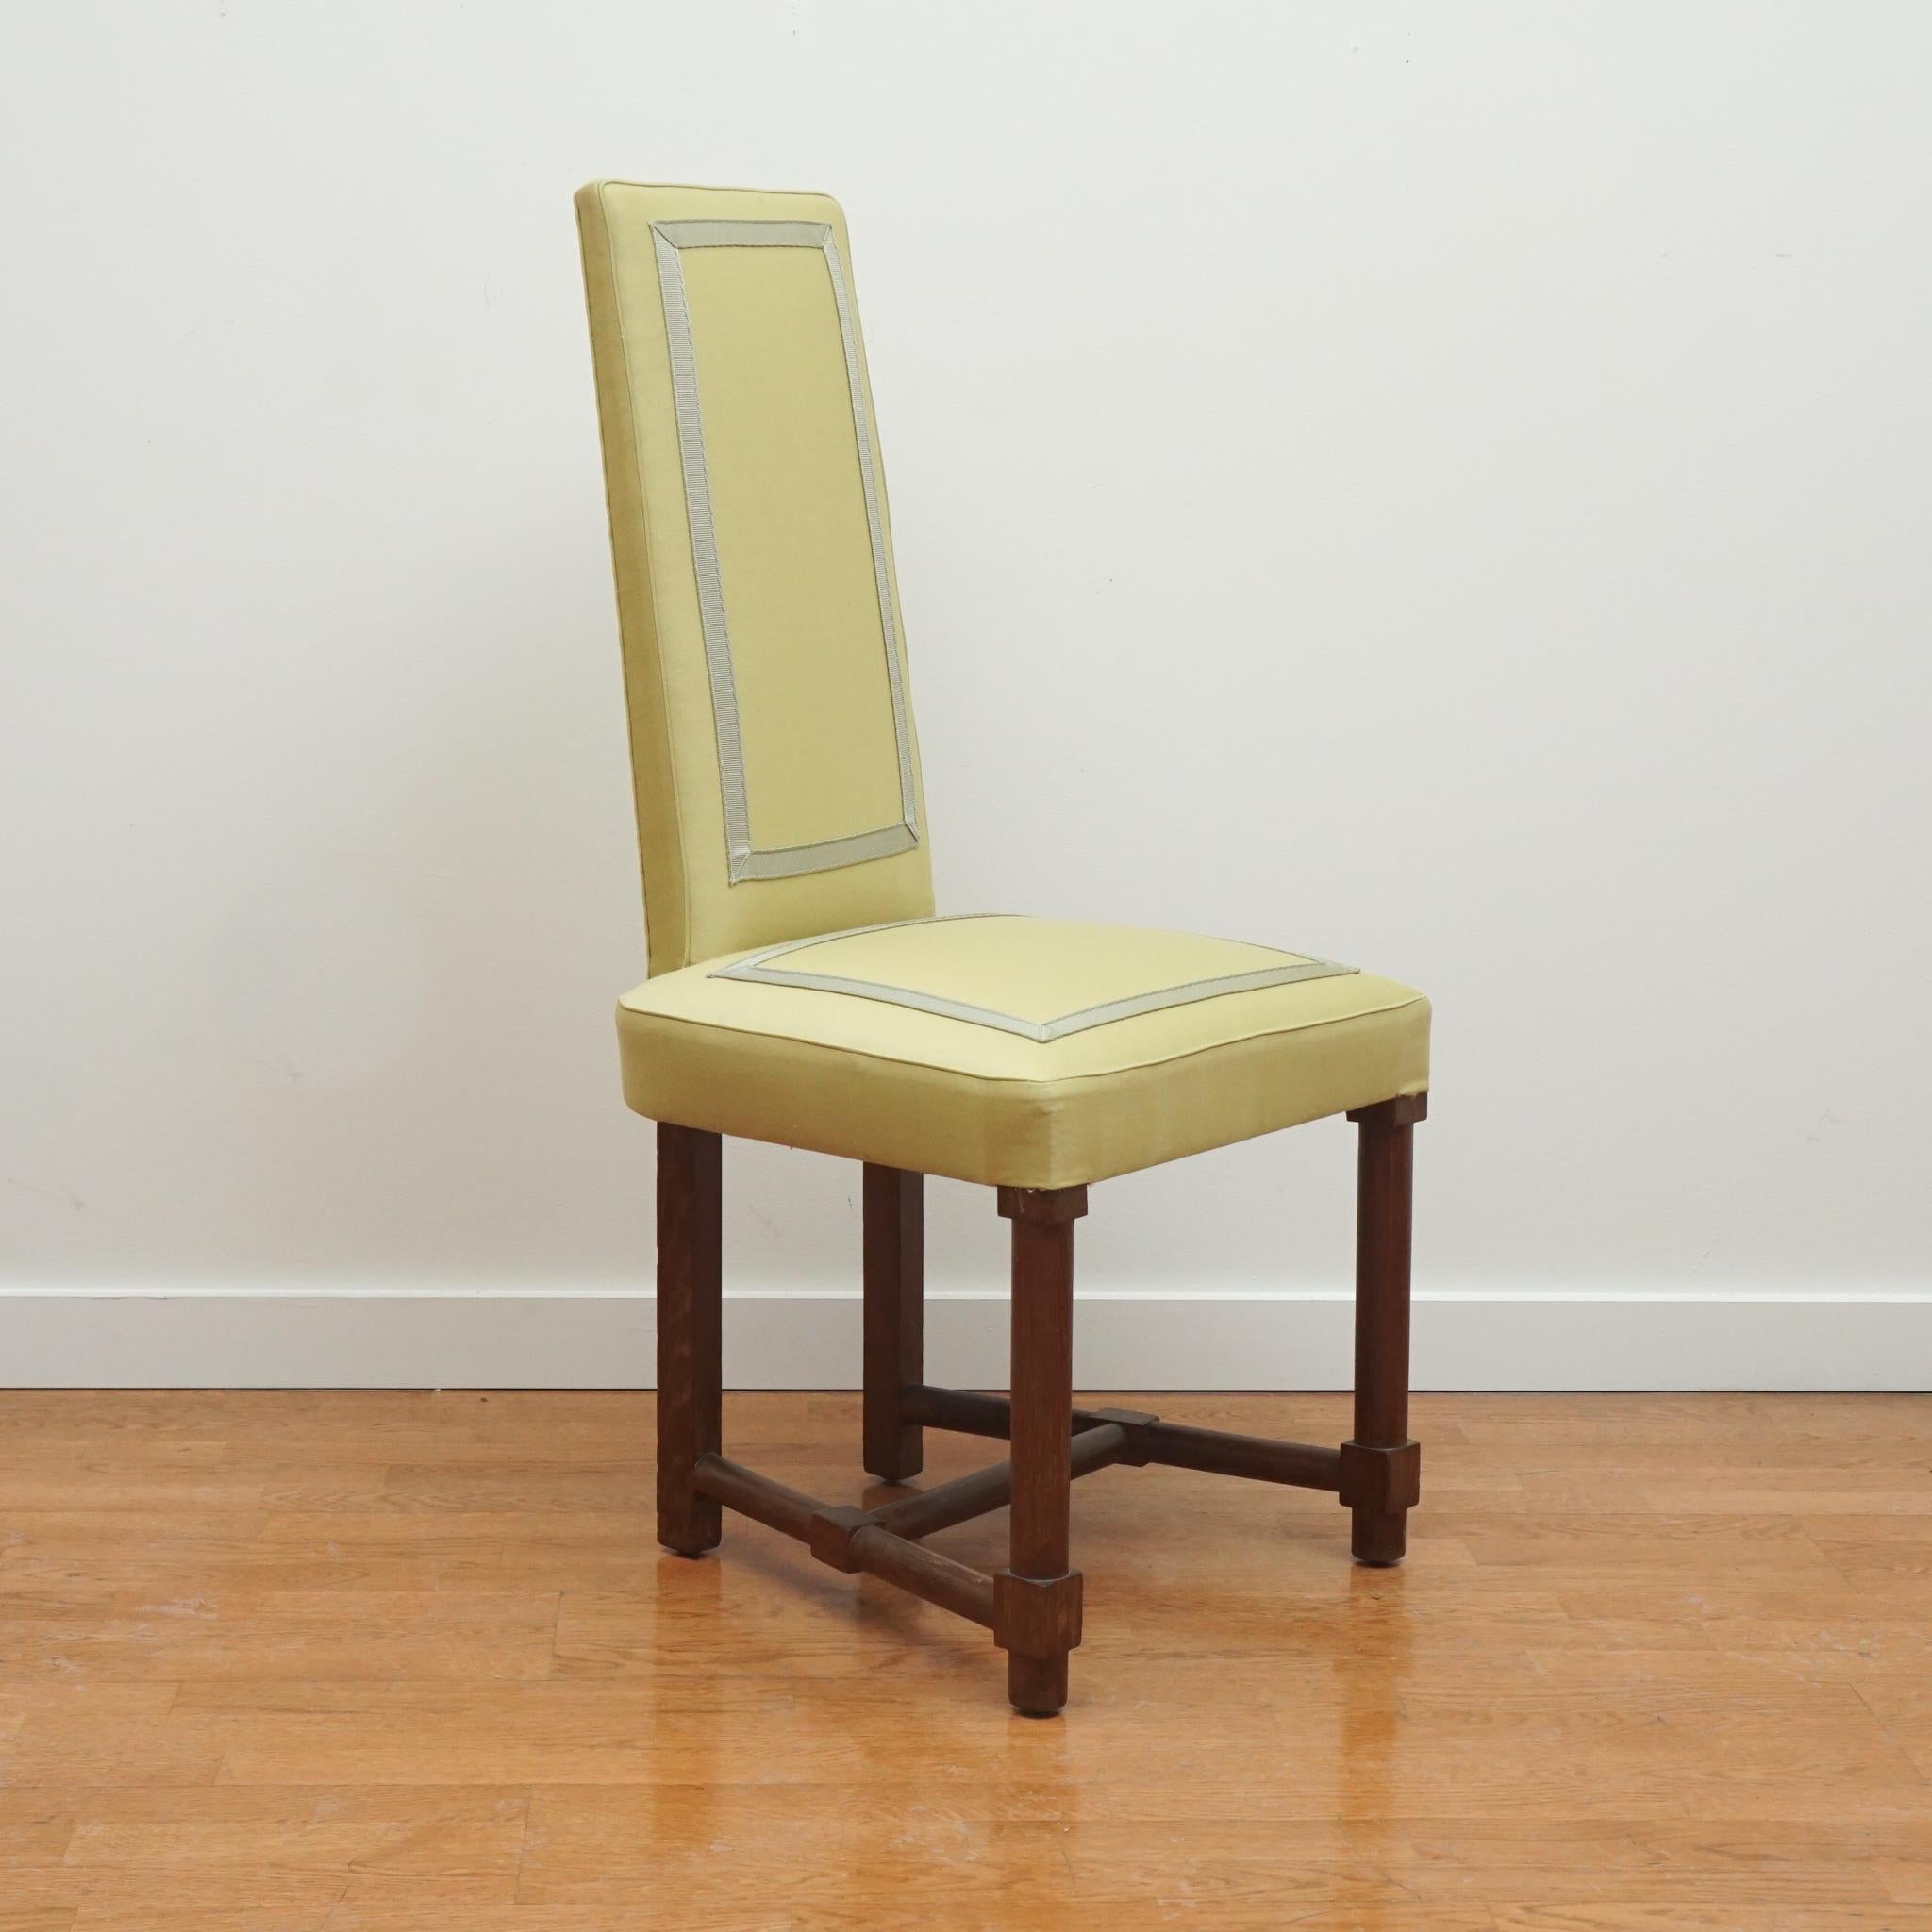 This tall back, neoclassic side chair is attributed to French designer Jacques Adnet circa 1945. The tight back and seat is enhanced with an appliqued decorative banding front and back. The chair legs offer a distinctive look as well. The Jacque